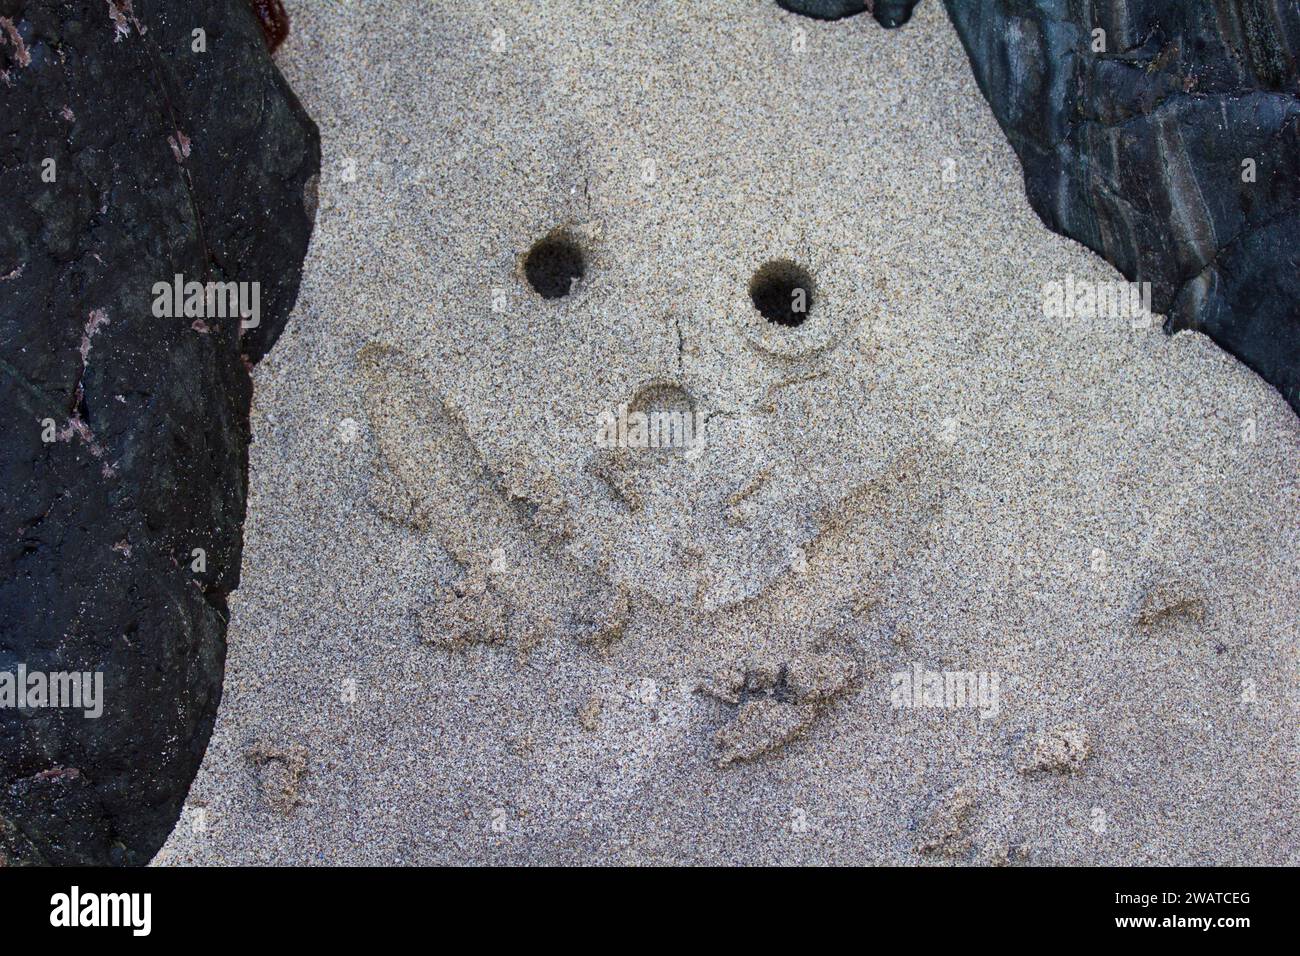 Sandy smile drawn in the sand at Kennack Sands, Lizard Peninsula, Cornwall Stock Photo